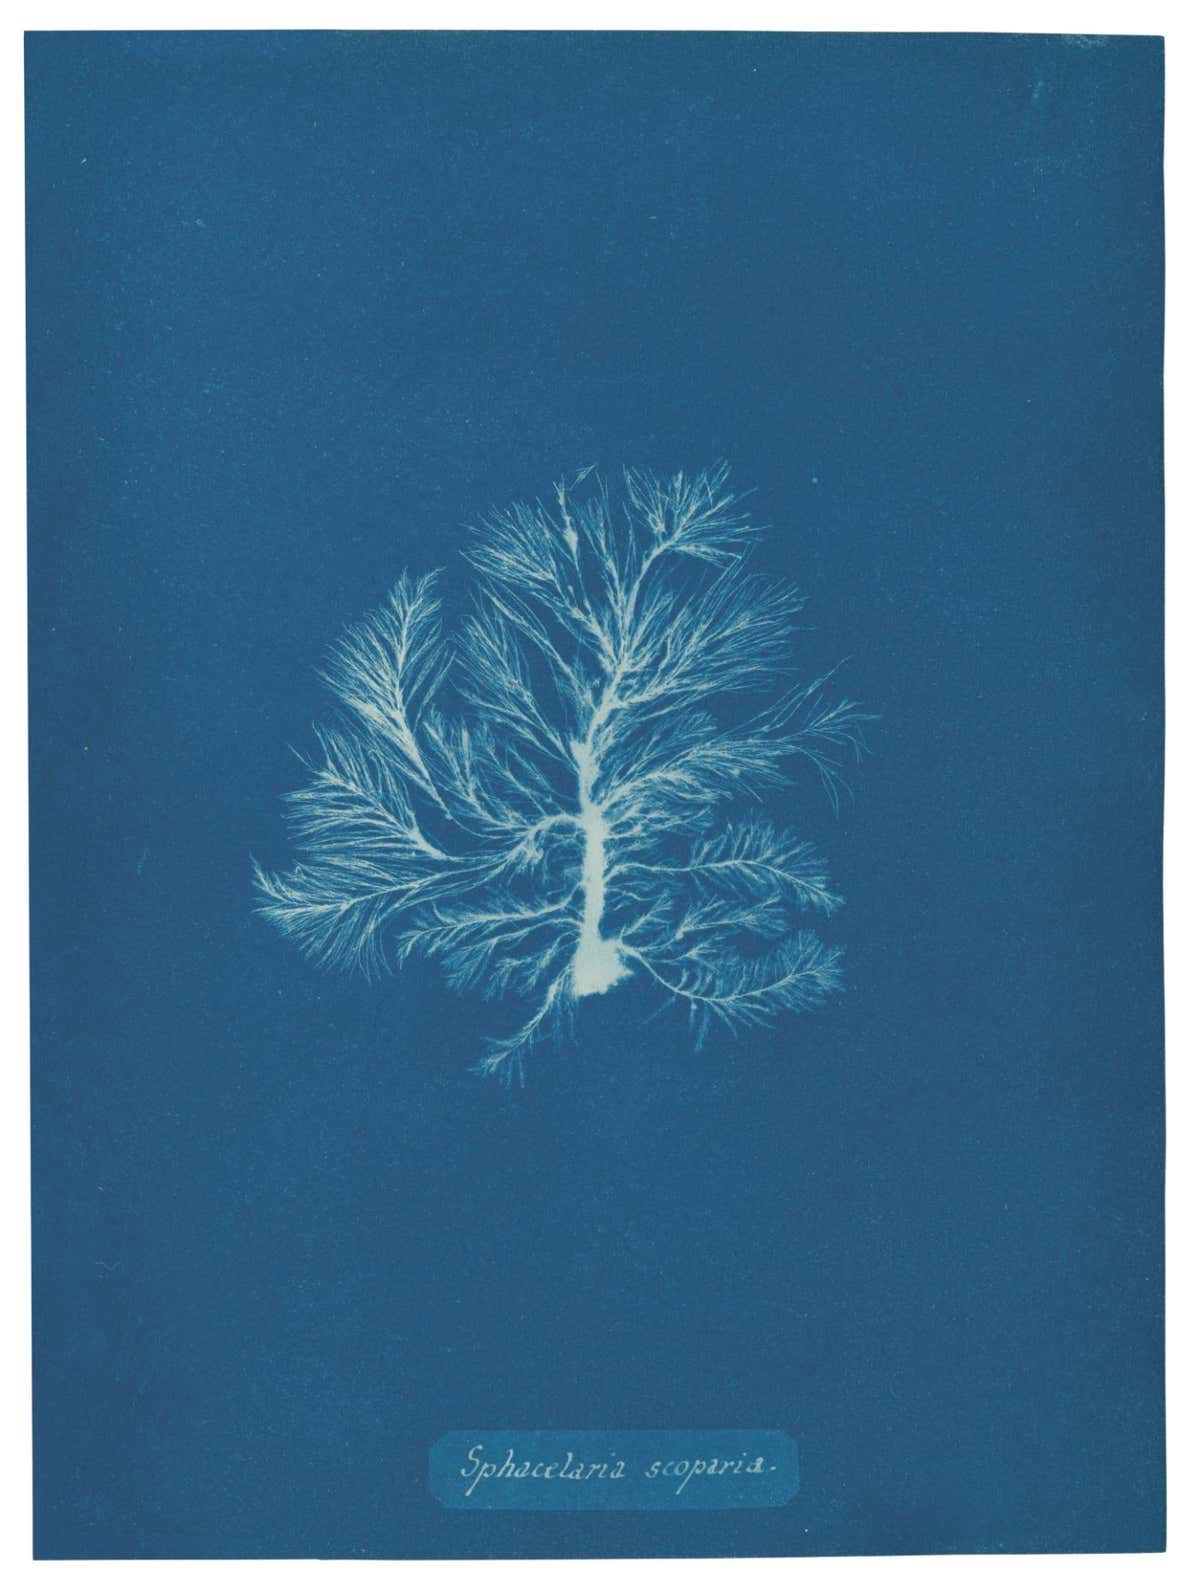 http://www.metmuseum.org/art/collection/search/291522 Sphacelaria scoparia Anna Atkins, British Algae, Part III (1844)